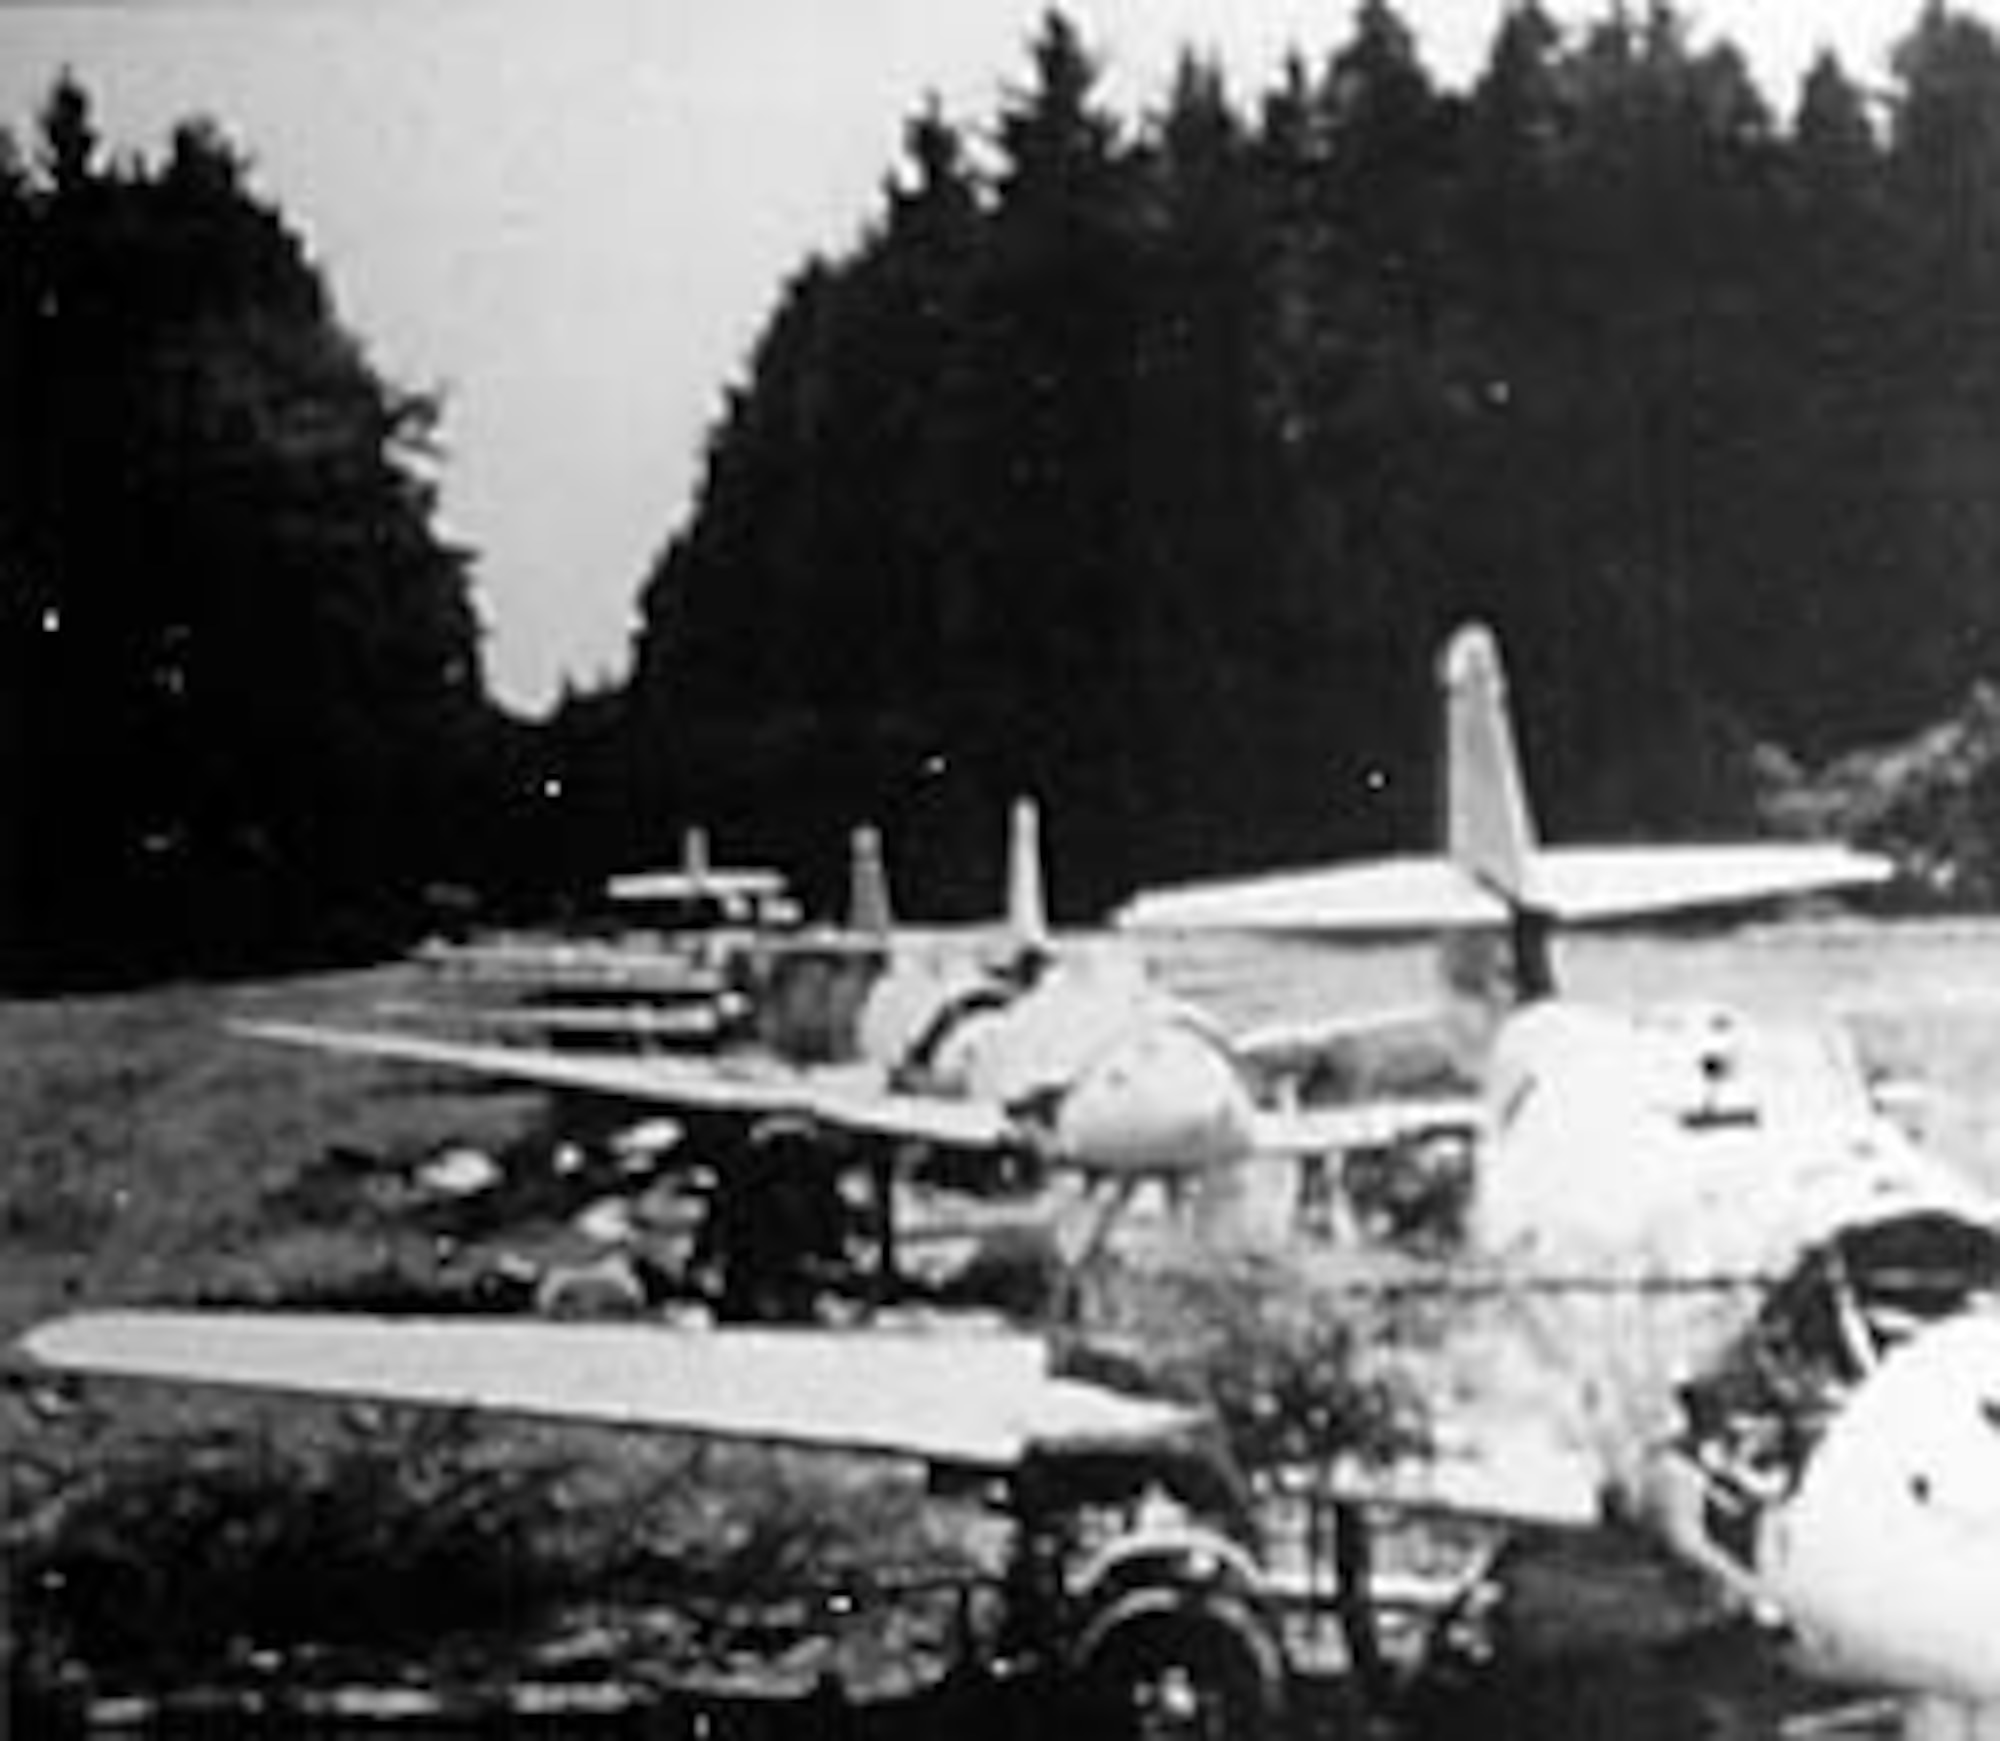 Before they could be completed, these new Me 262s were systematically destroyed by the Germans to prevent the Allies from capturing them intact. (U.S. Air Force photo)